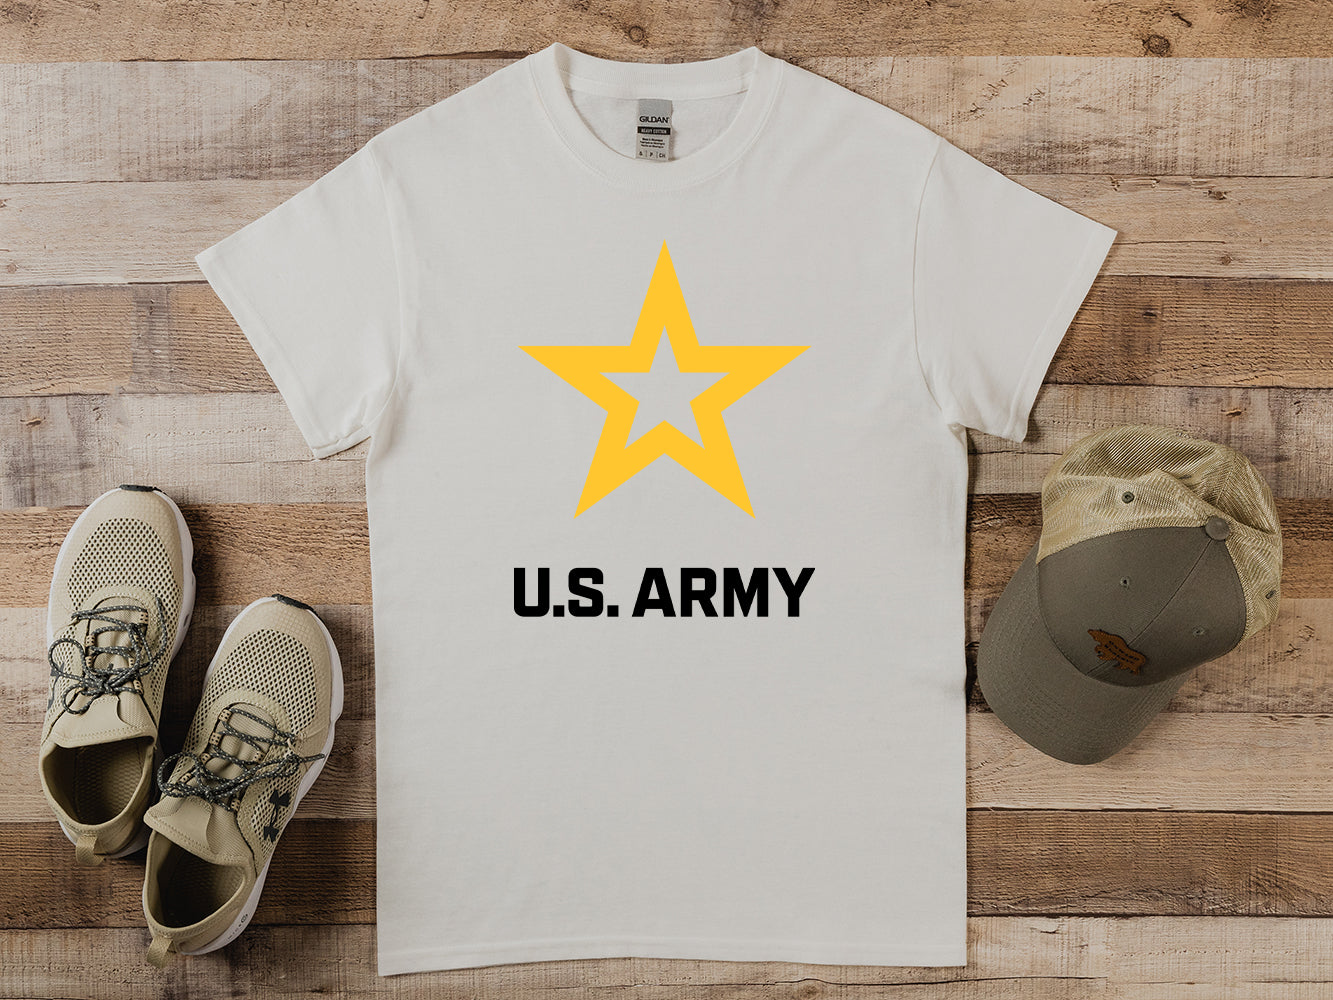 Officially Licensed U.S. Army Logo T-shirt